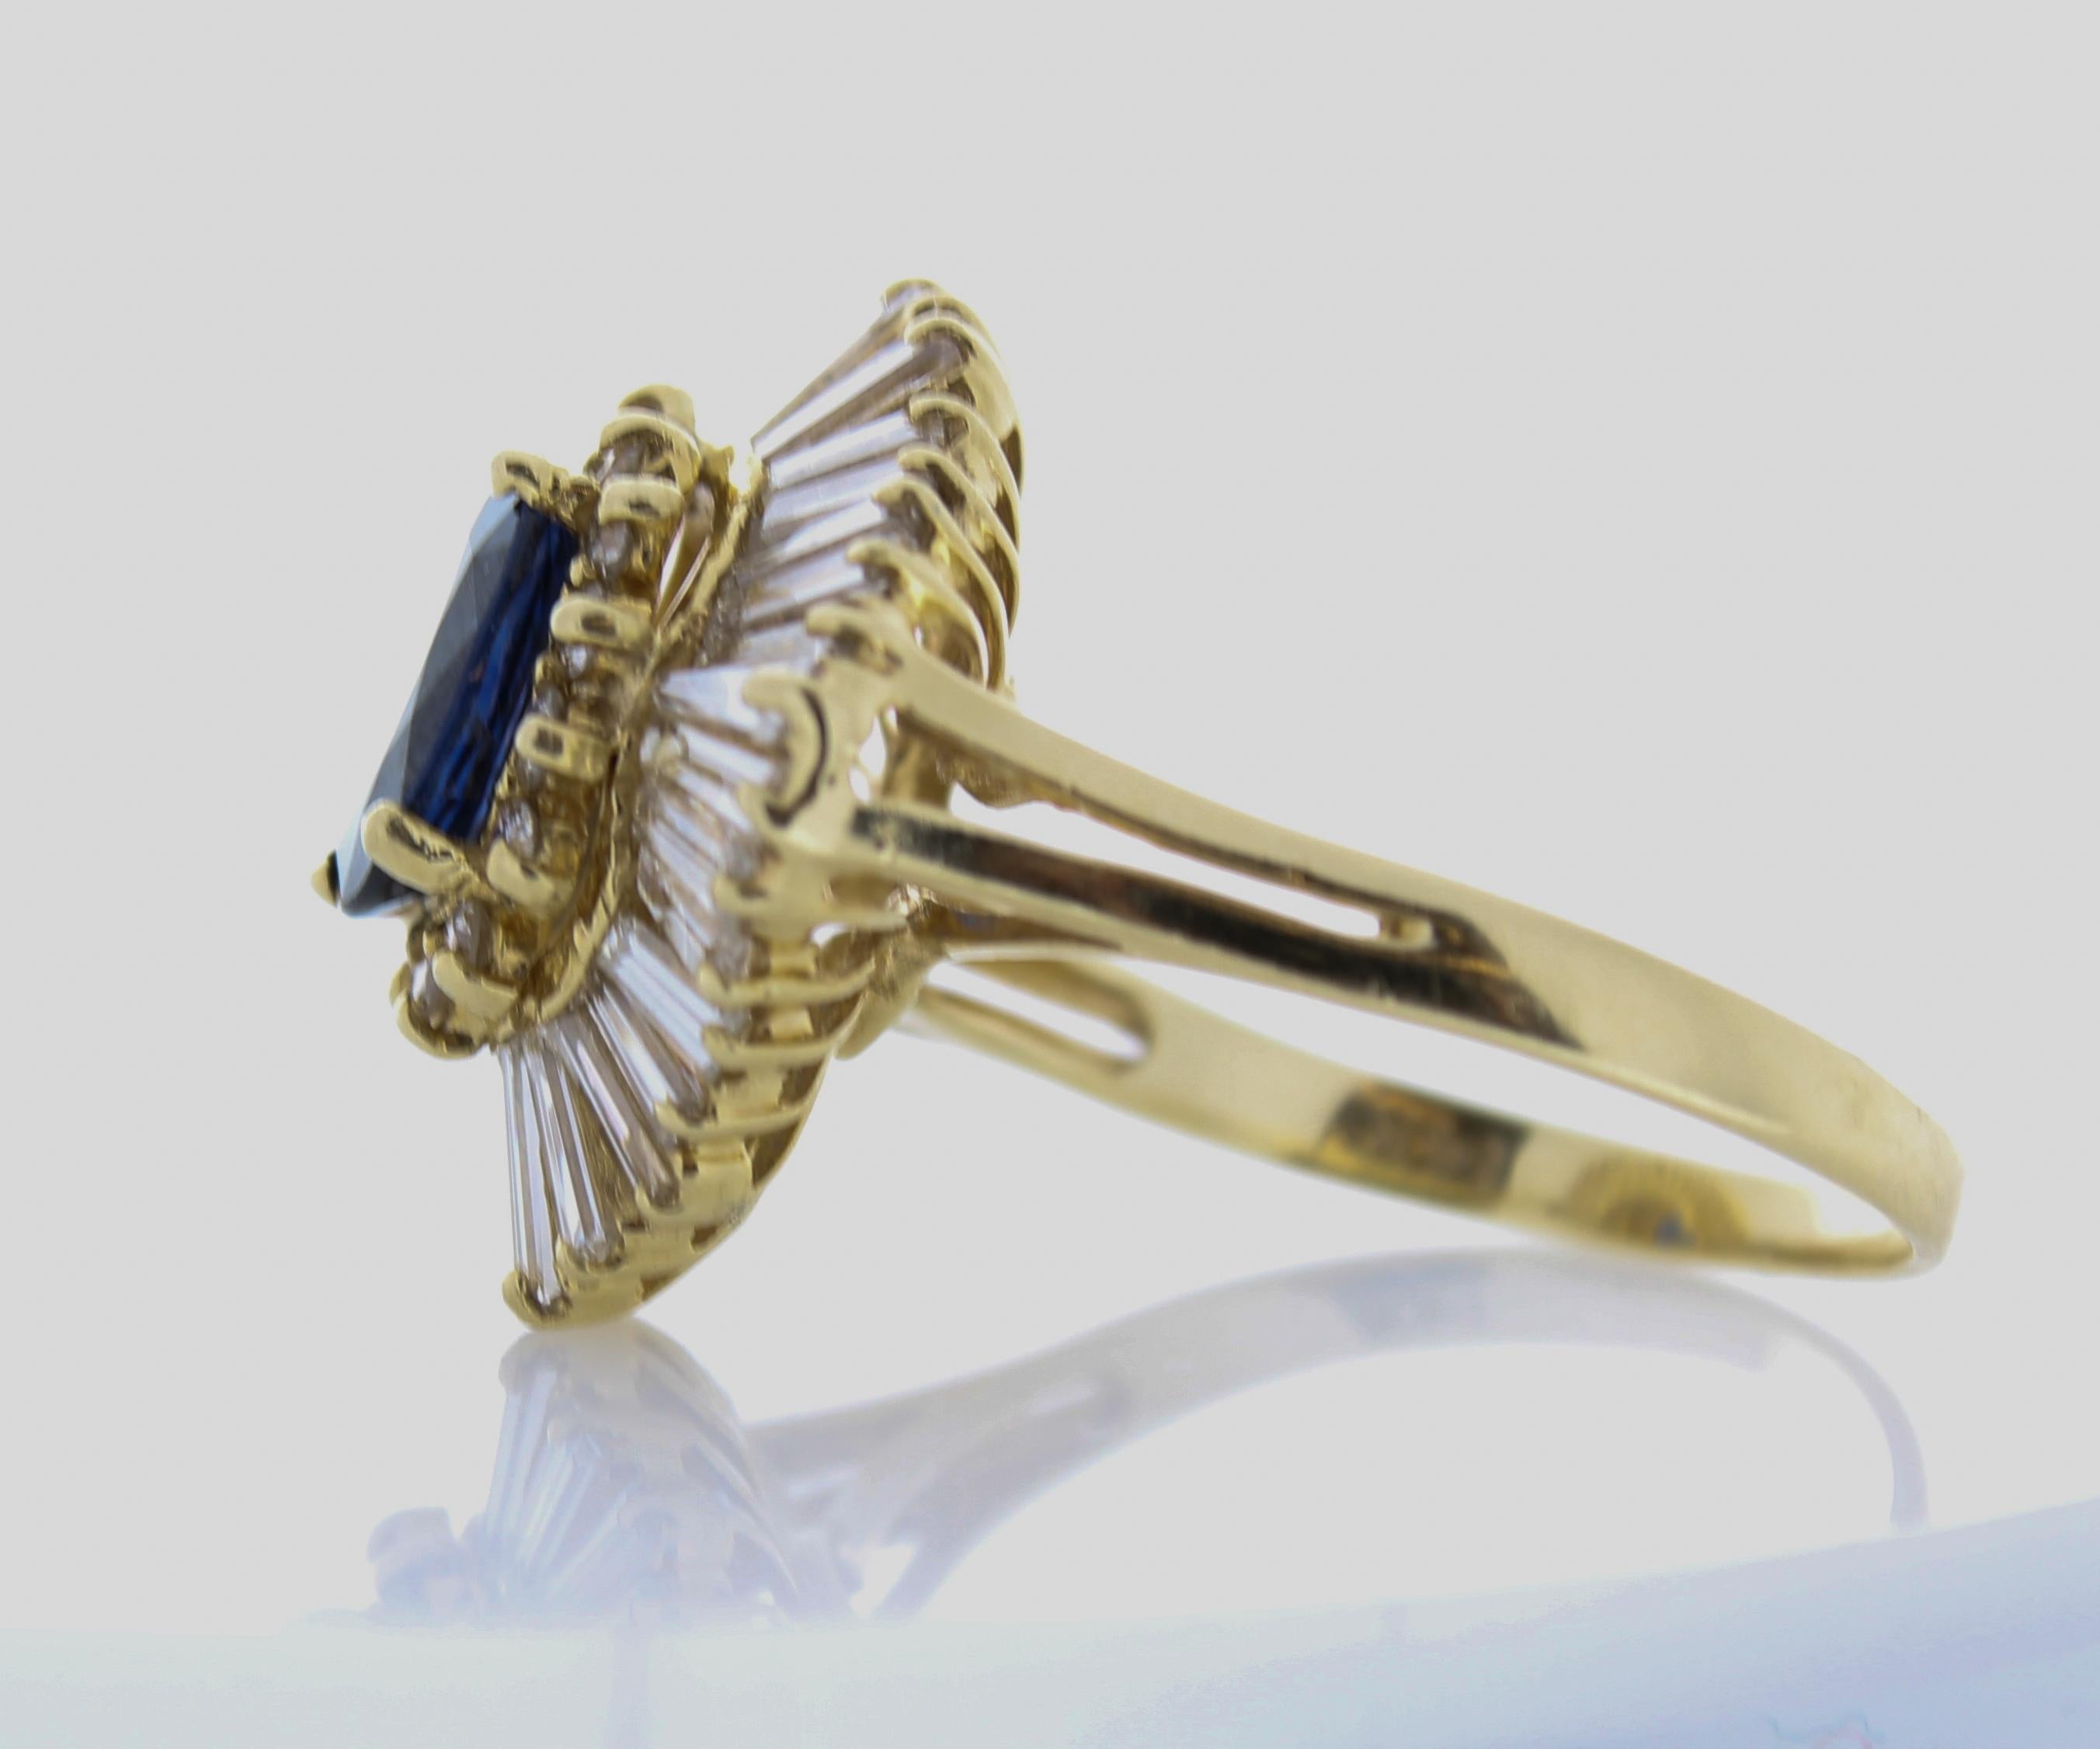 Contemporary 2 Carat Oval Sapphire & Diamond Ring in 14k Yellow Gold